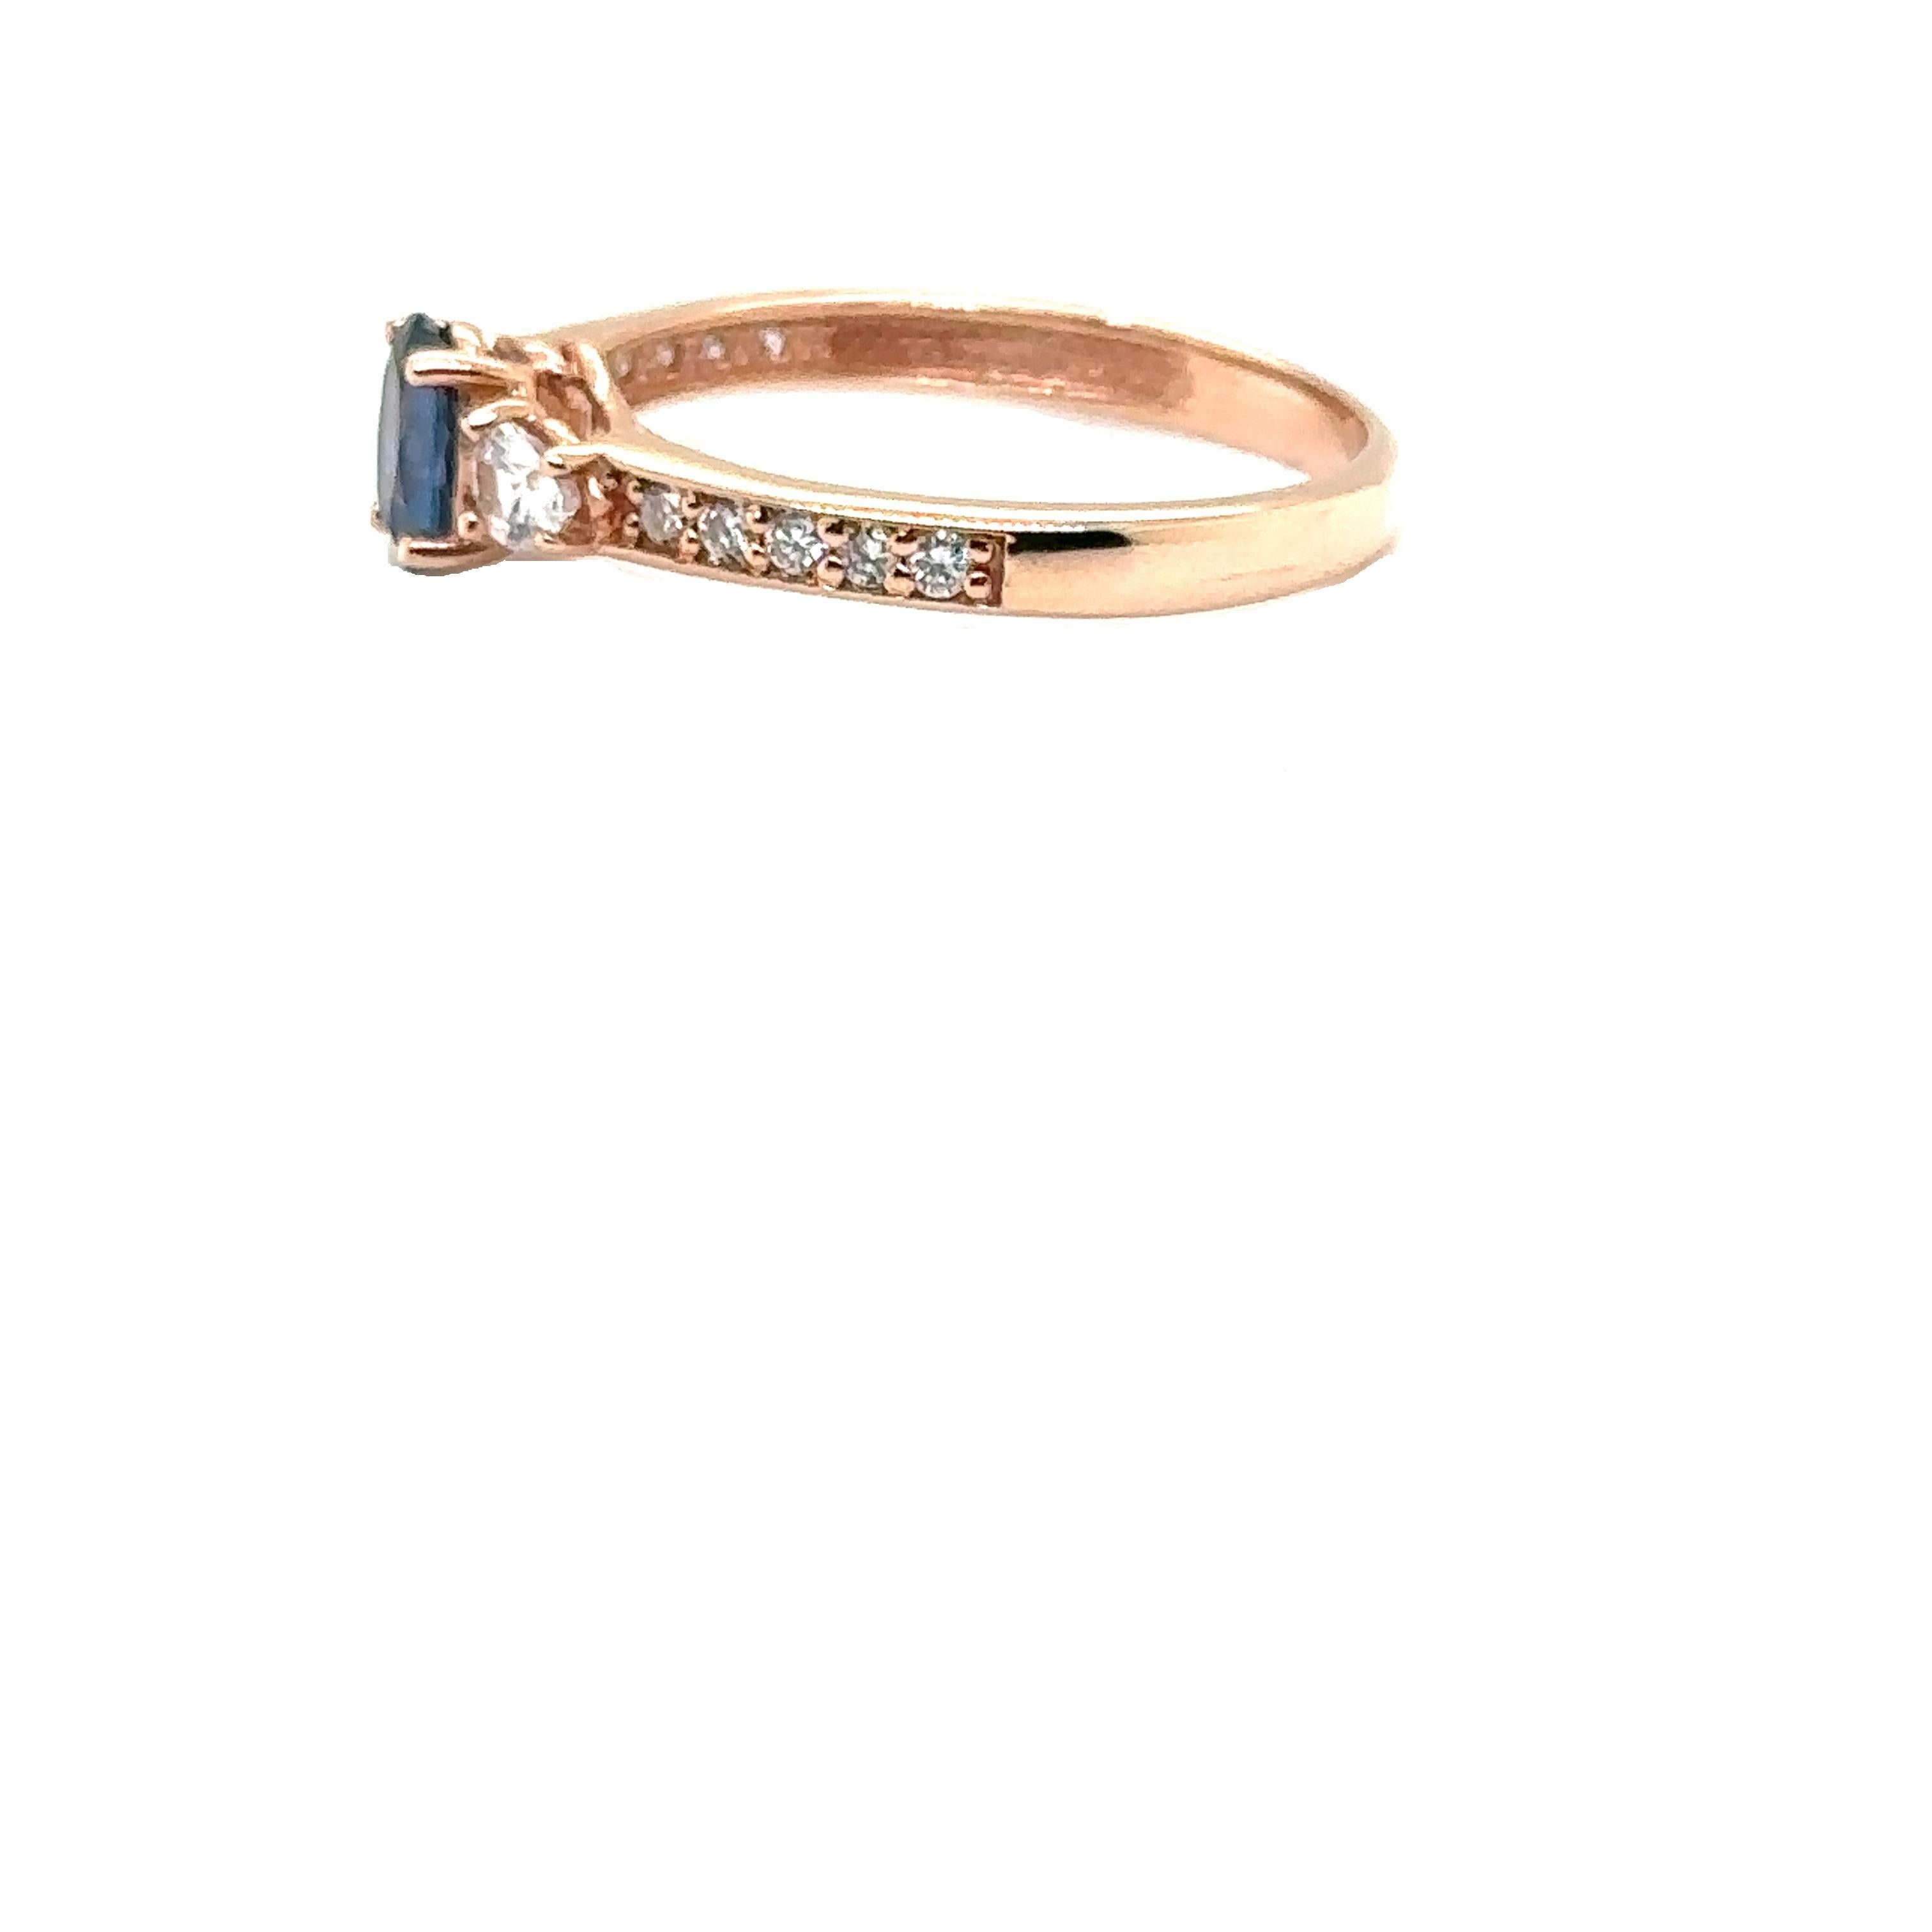 JAS-21-2240 - 14K ROSE GOLD OVAL SAPPHIRE RING with WHITE SAPPHIRES & DIAMONDS For Sale 6